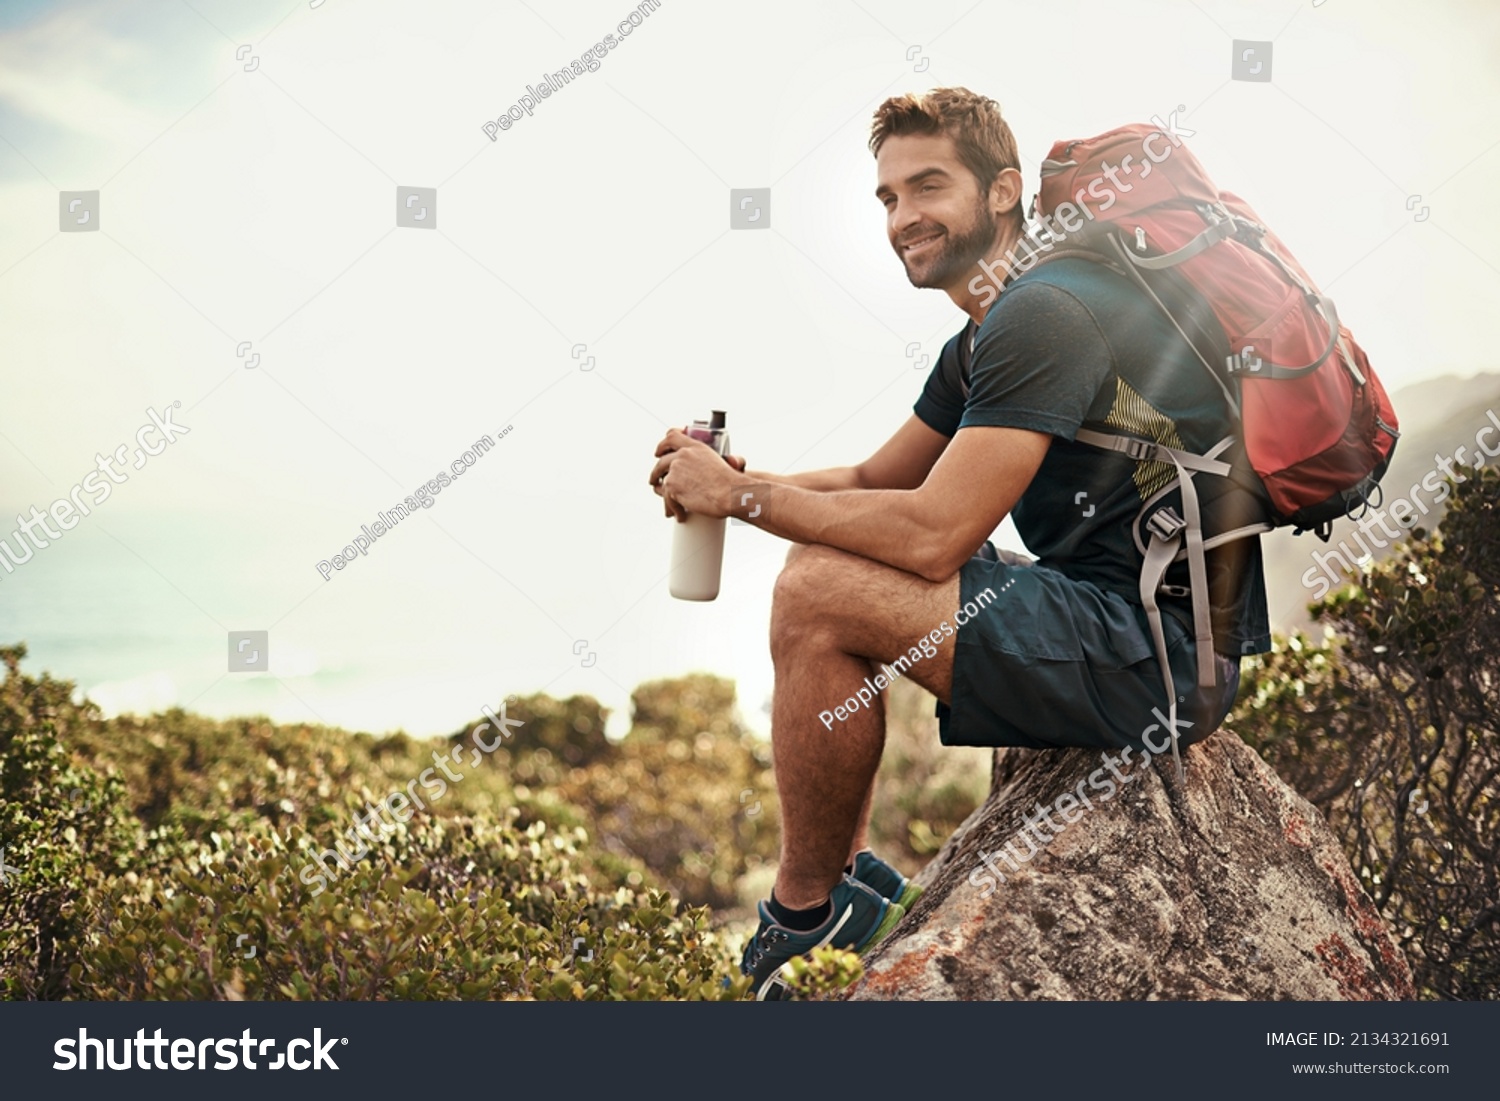 The perfect day to be out in nature.... Shot of a young man taking a water break while out hiking. #2134321691